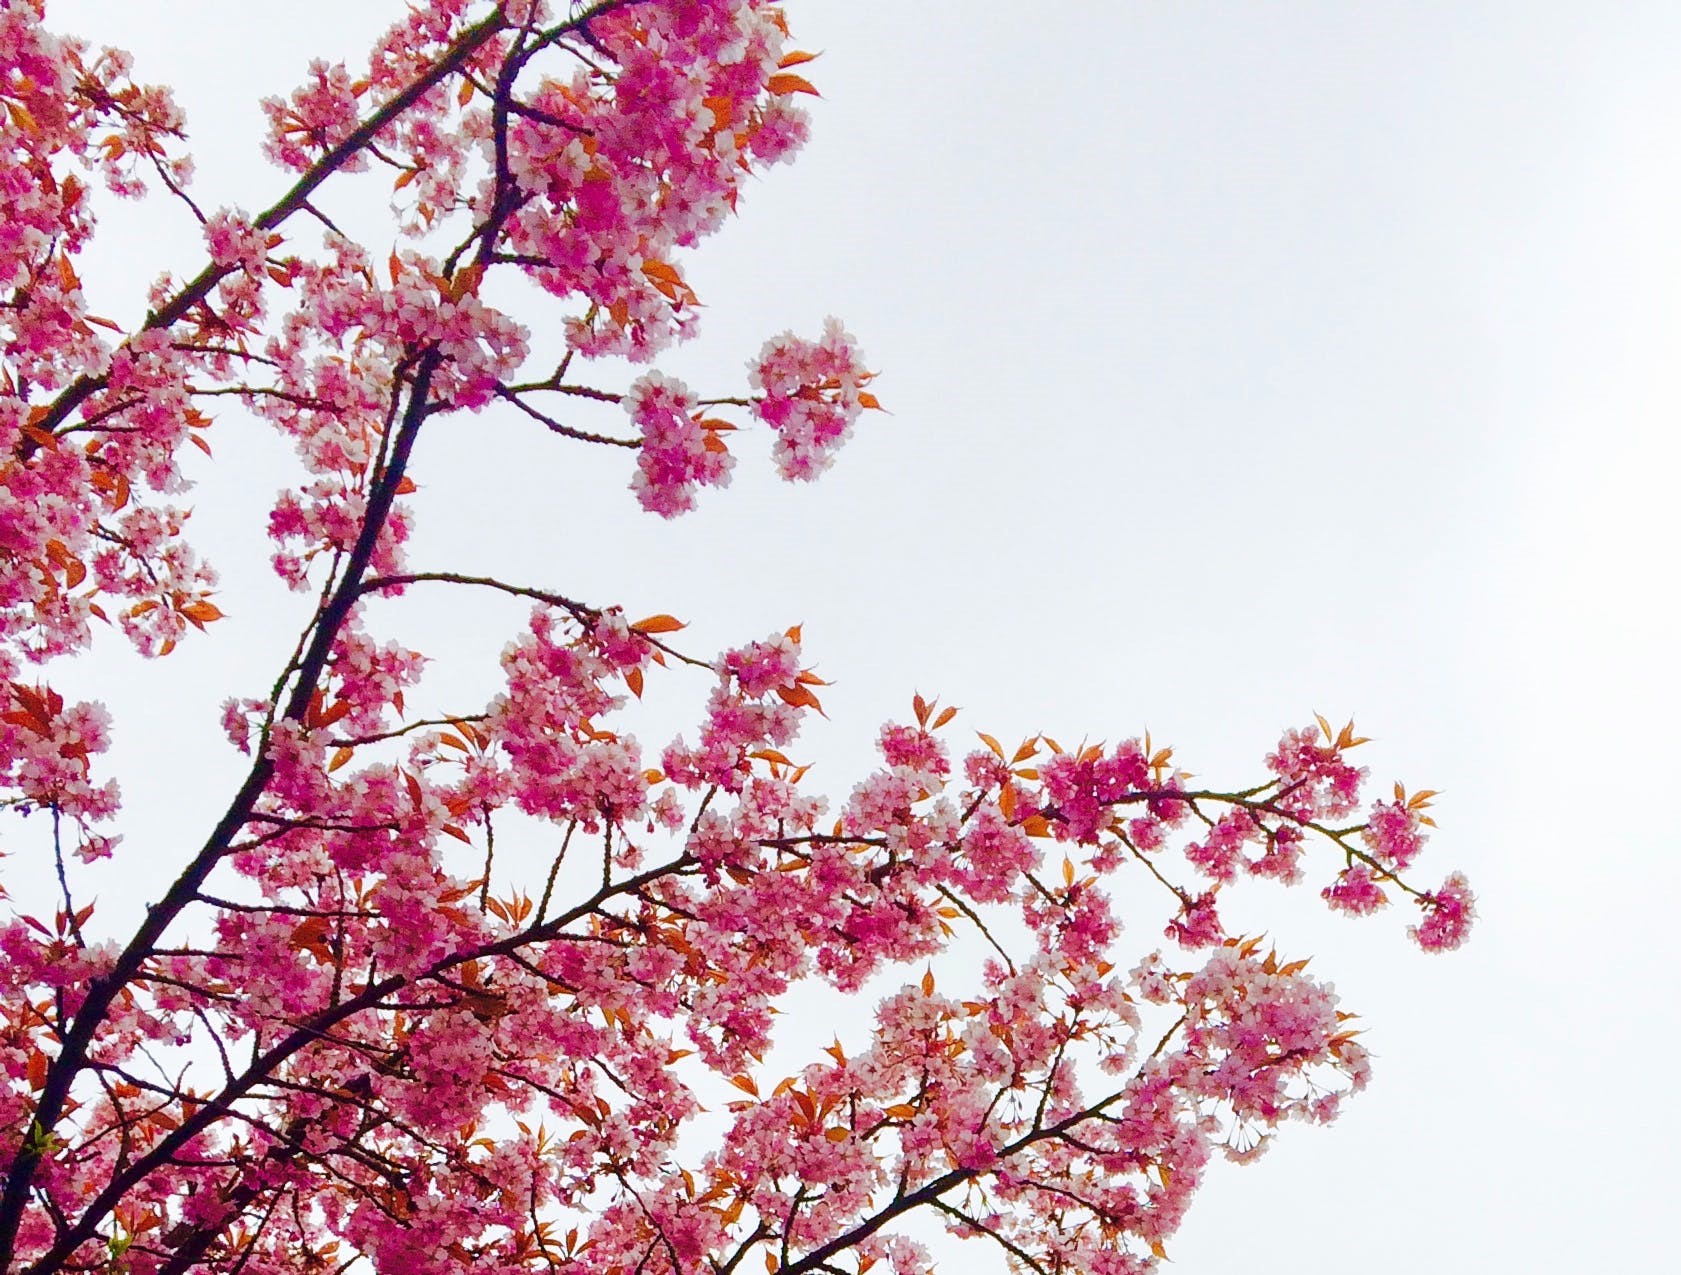 branch of cherry blossom tree with pink flowers against light background